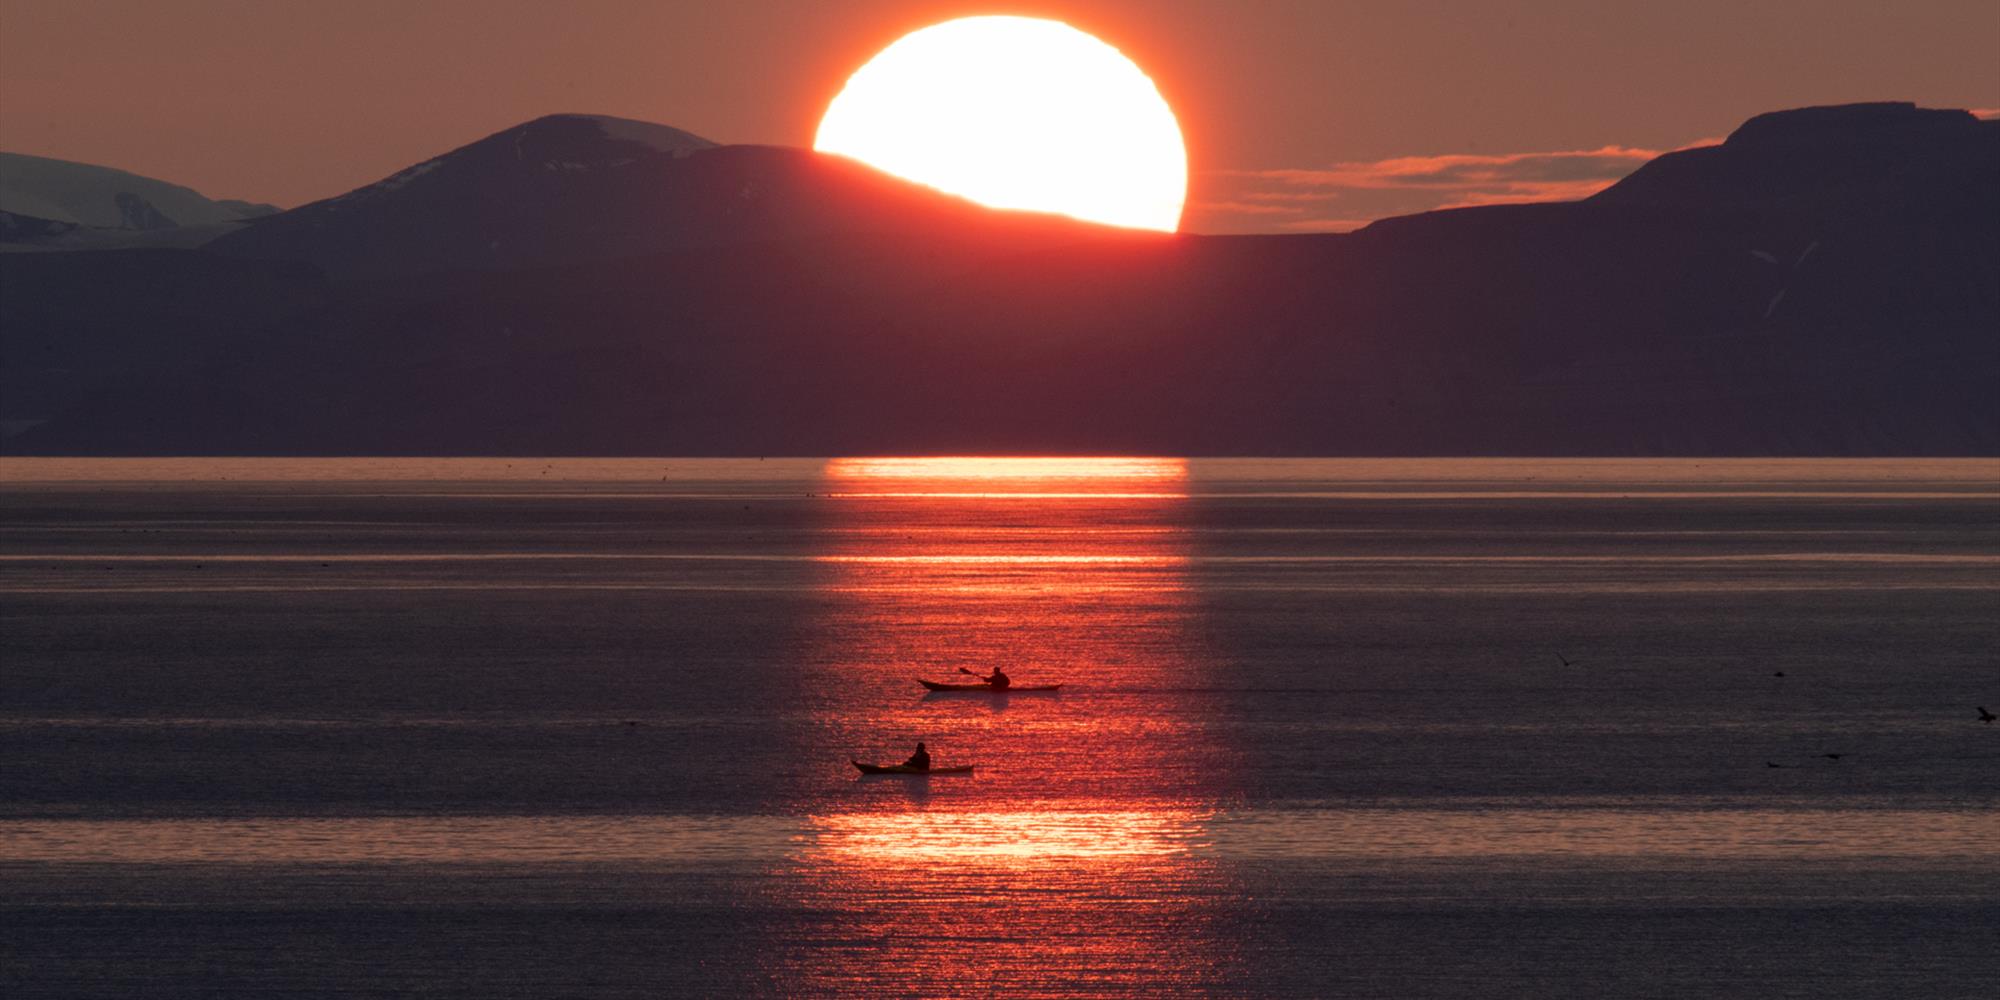 Two persons kayaking in the sunset on the ocean